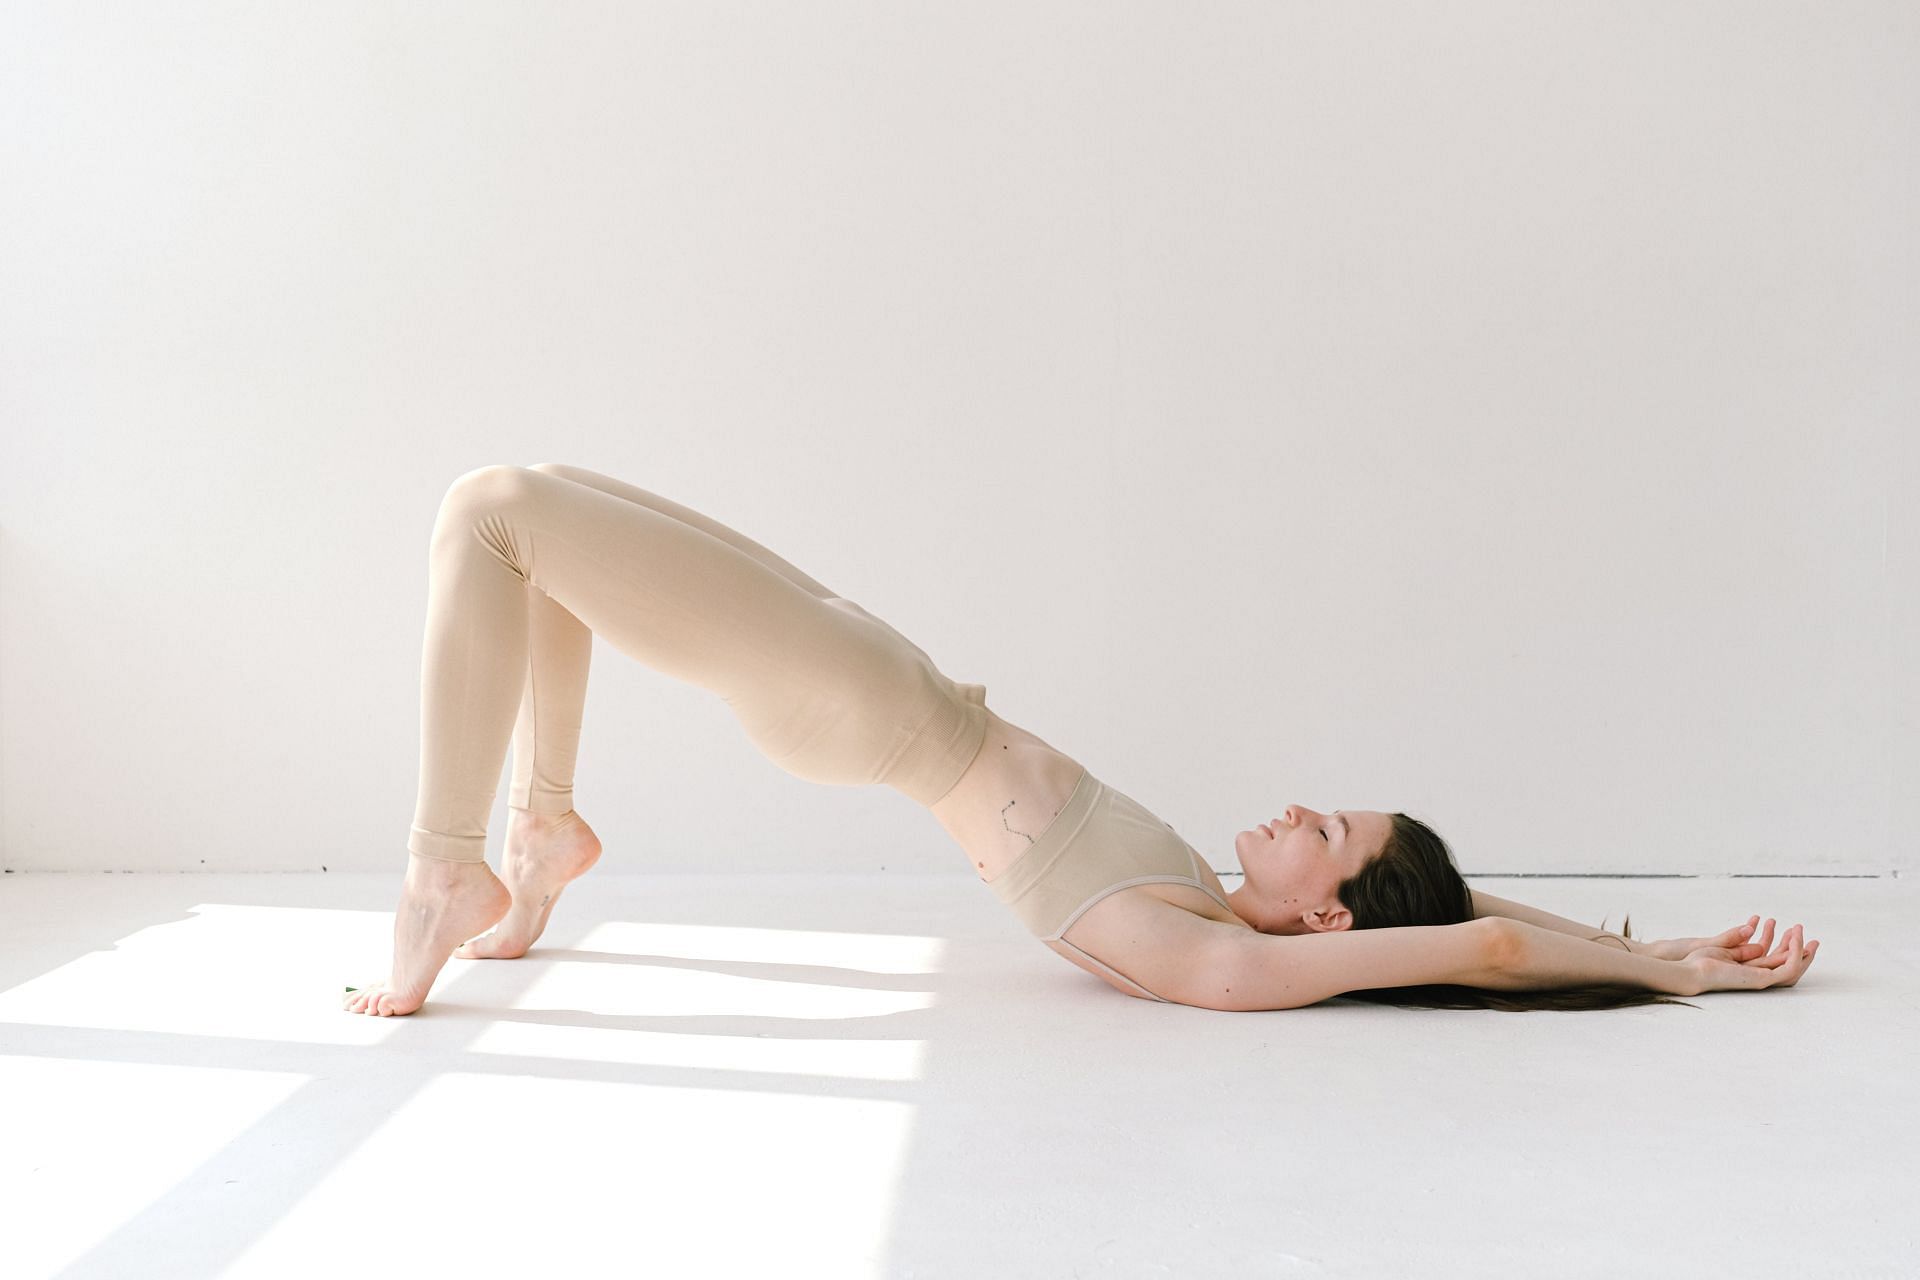 Benefits of pilates (image sourced via Pexels / Photo by anna)